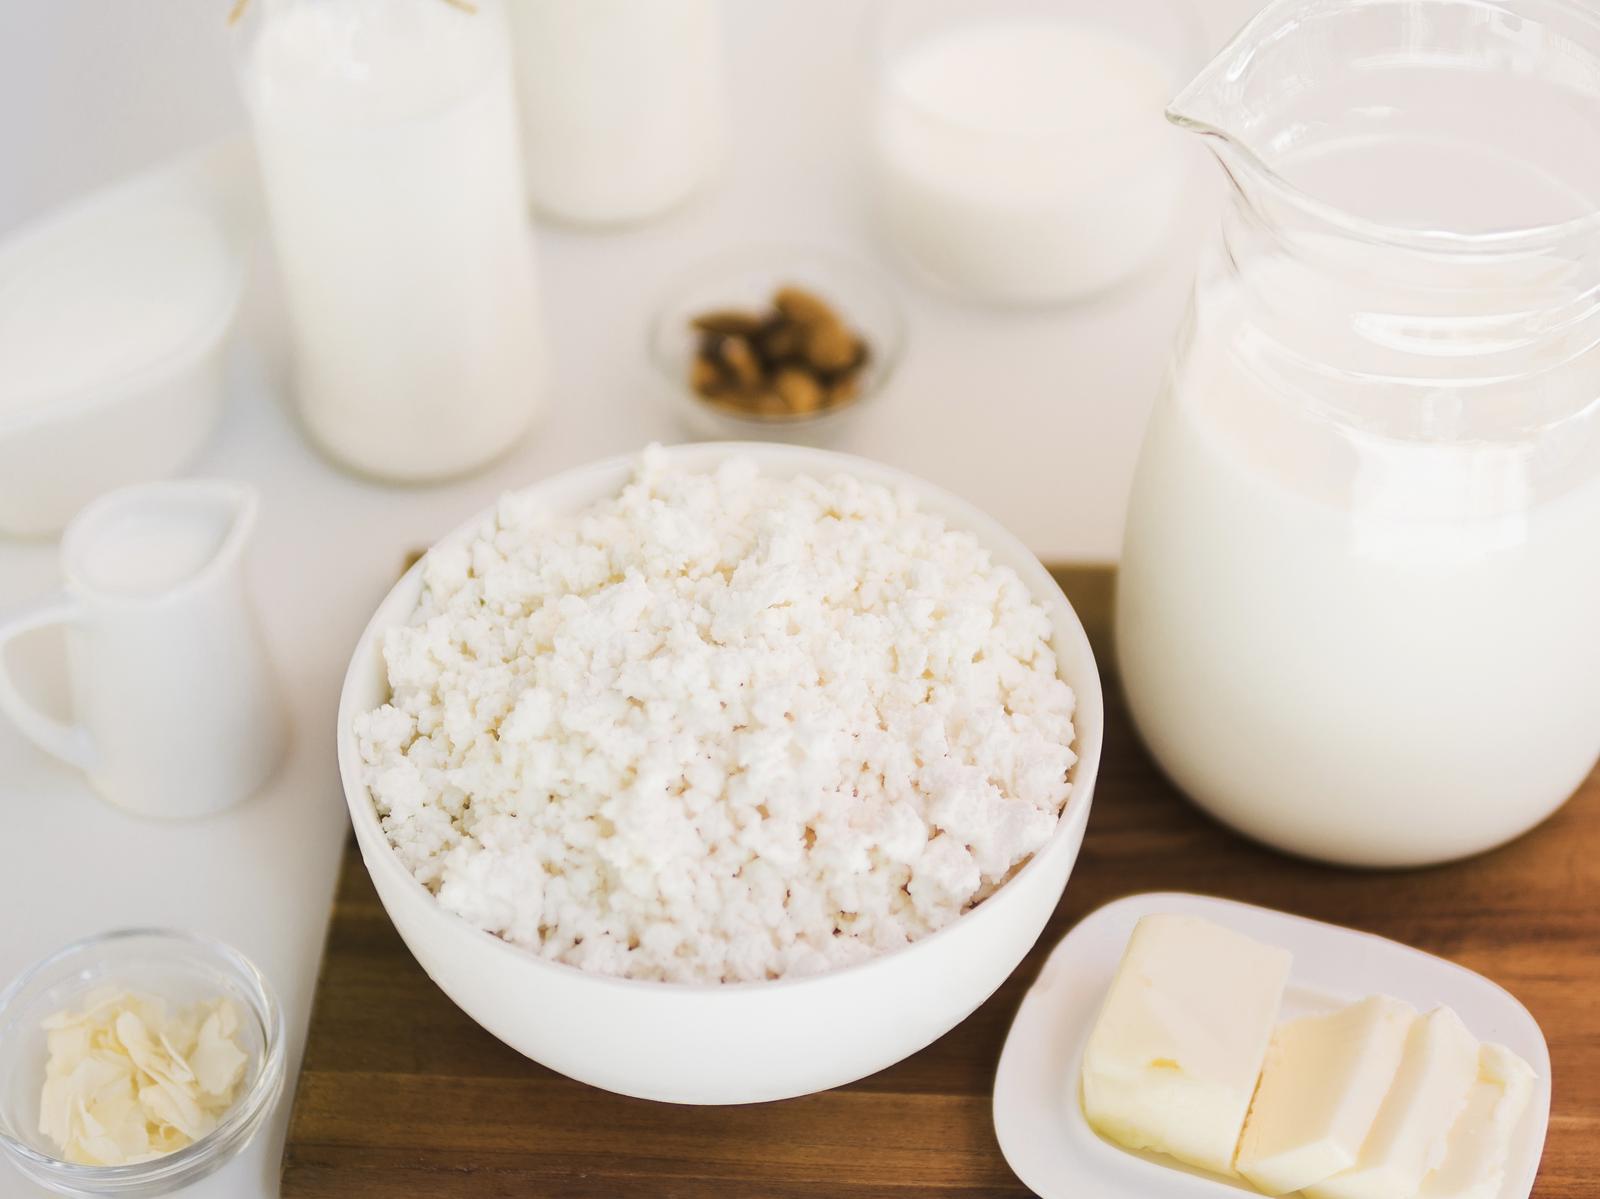 Wholesale of dairy products, eggs and edible oils and fats in Viljandi